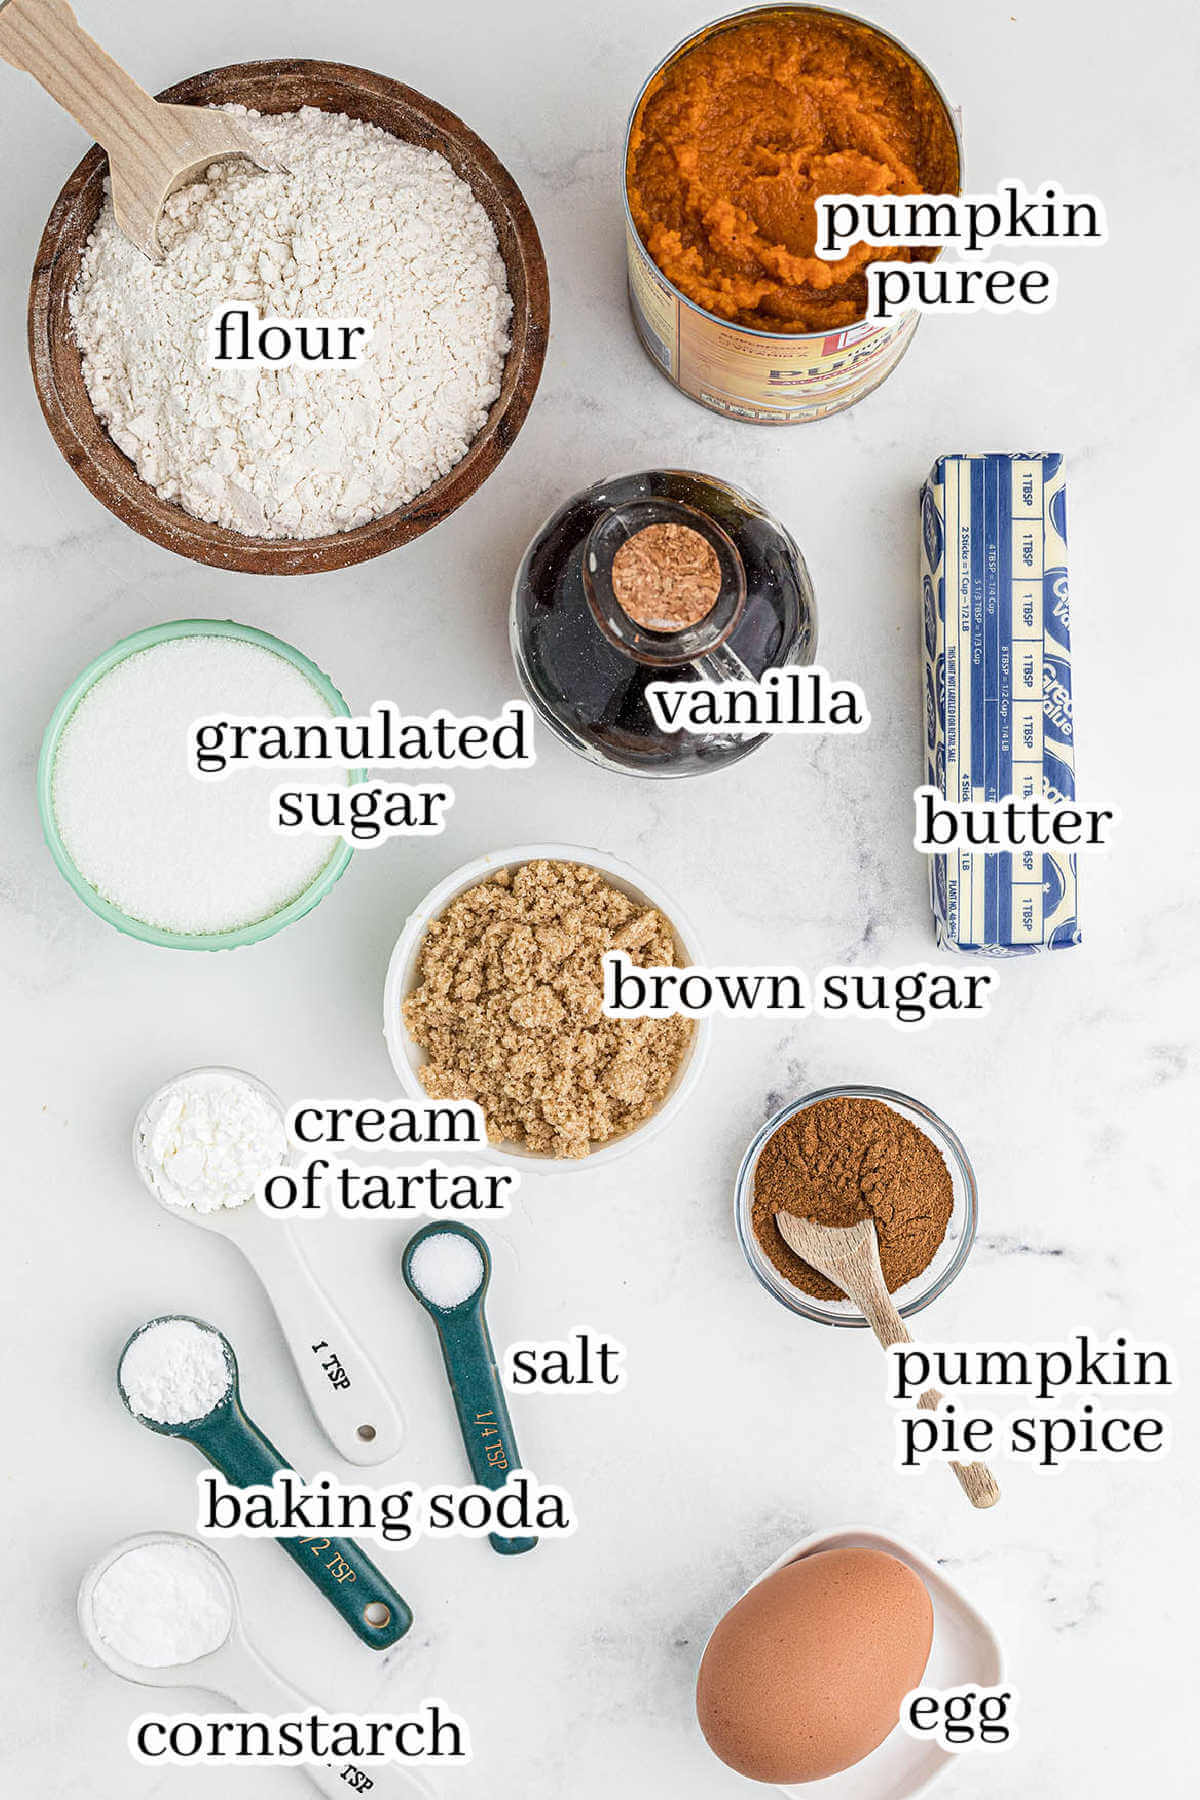 Ingredients to make cookie recipe, with print overlay.